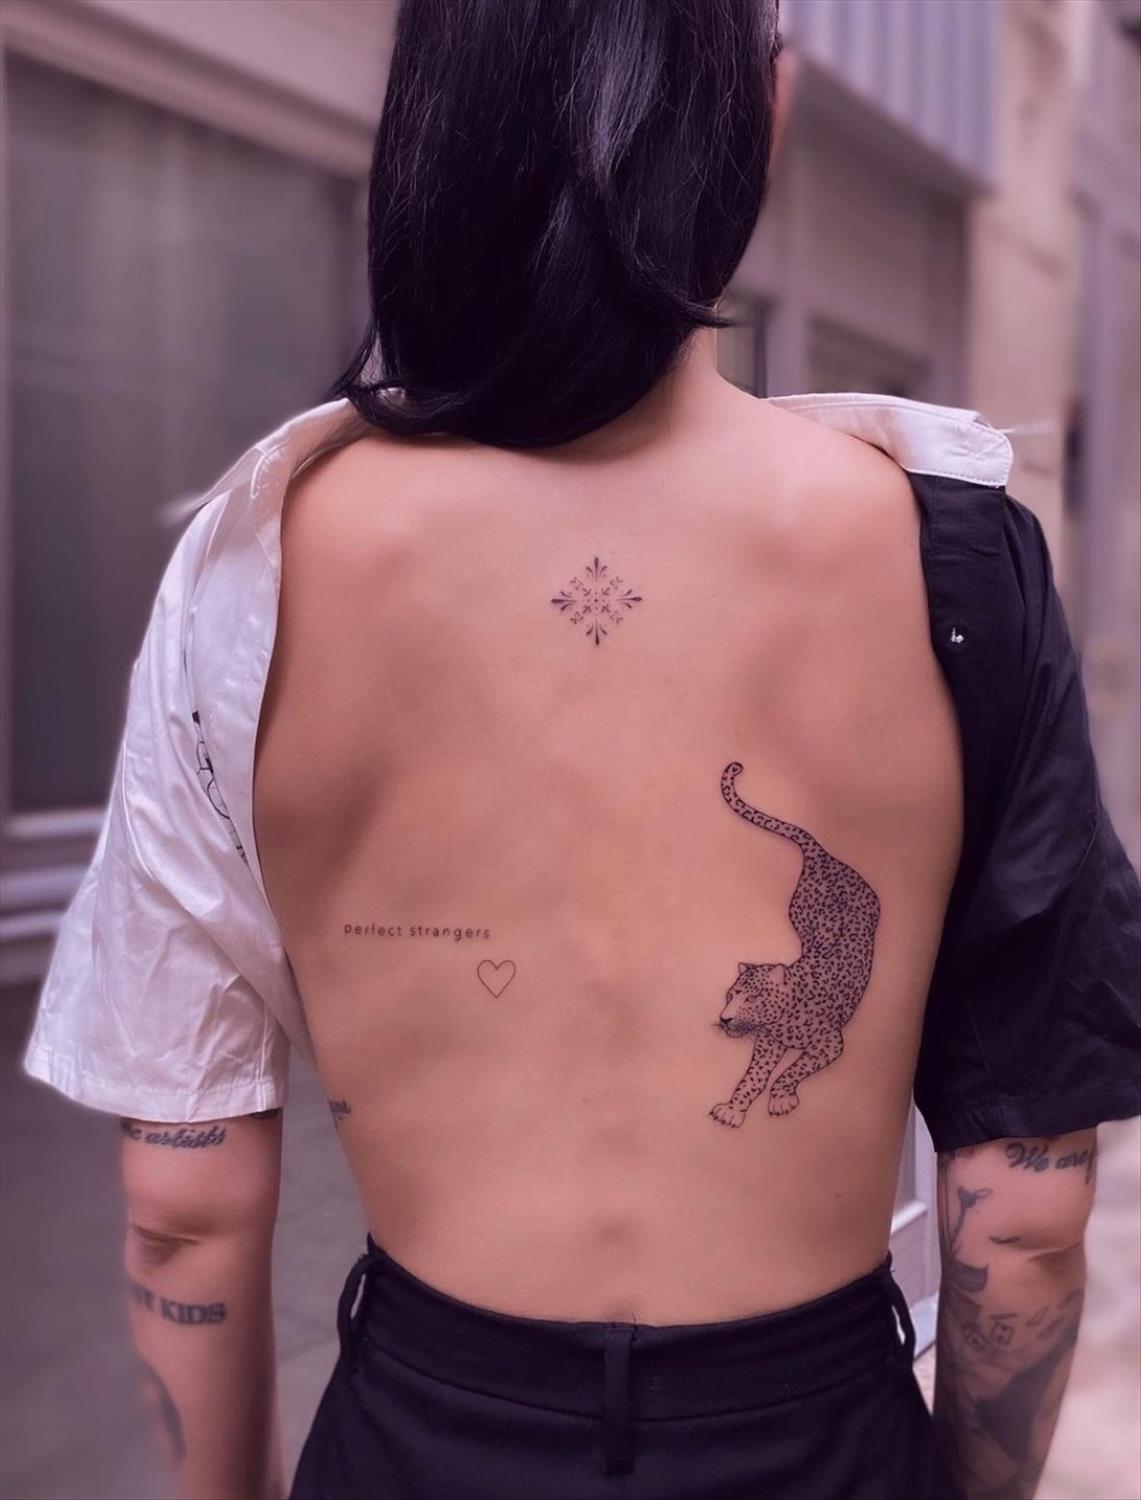 Unique and Charming Back Tattoo Designs for Women